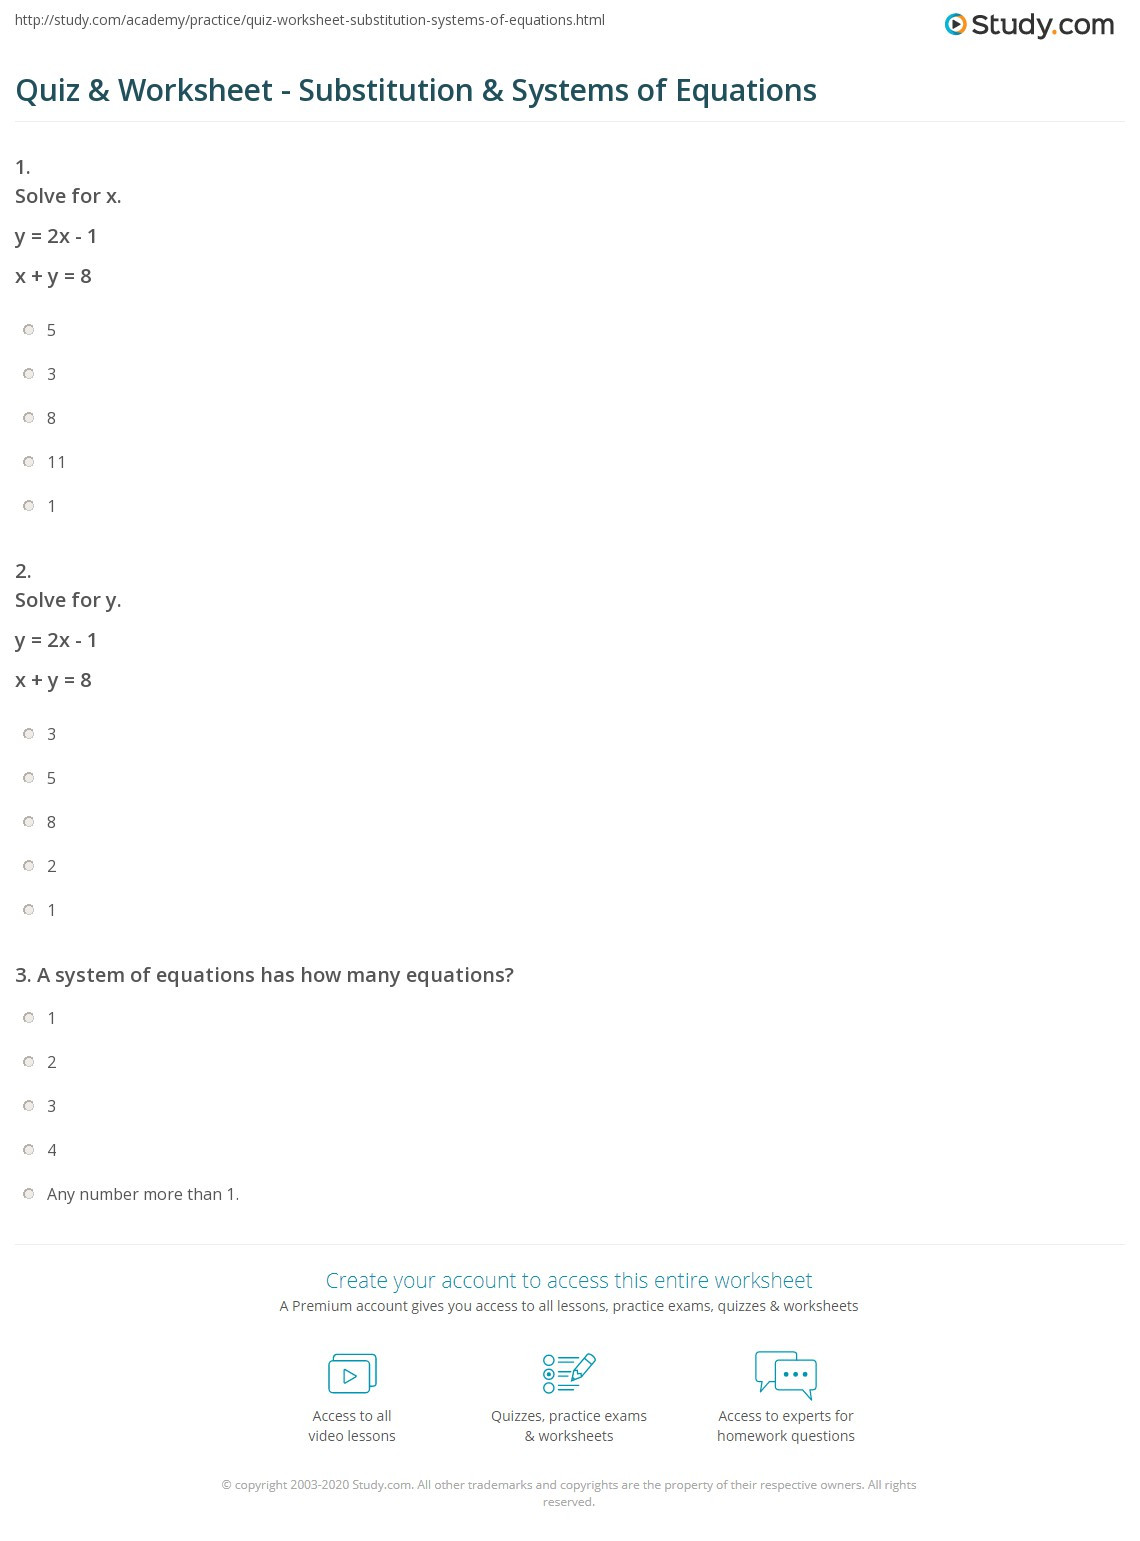 Systems Of Equations Review Worksheet Quiz &amp; Worksheet Substitution &amp; Systems Of Equations